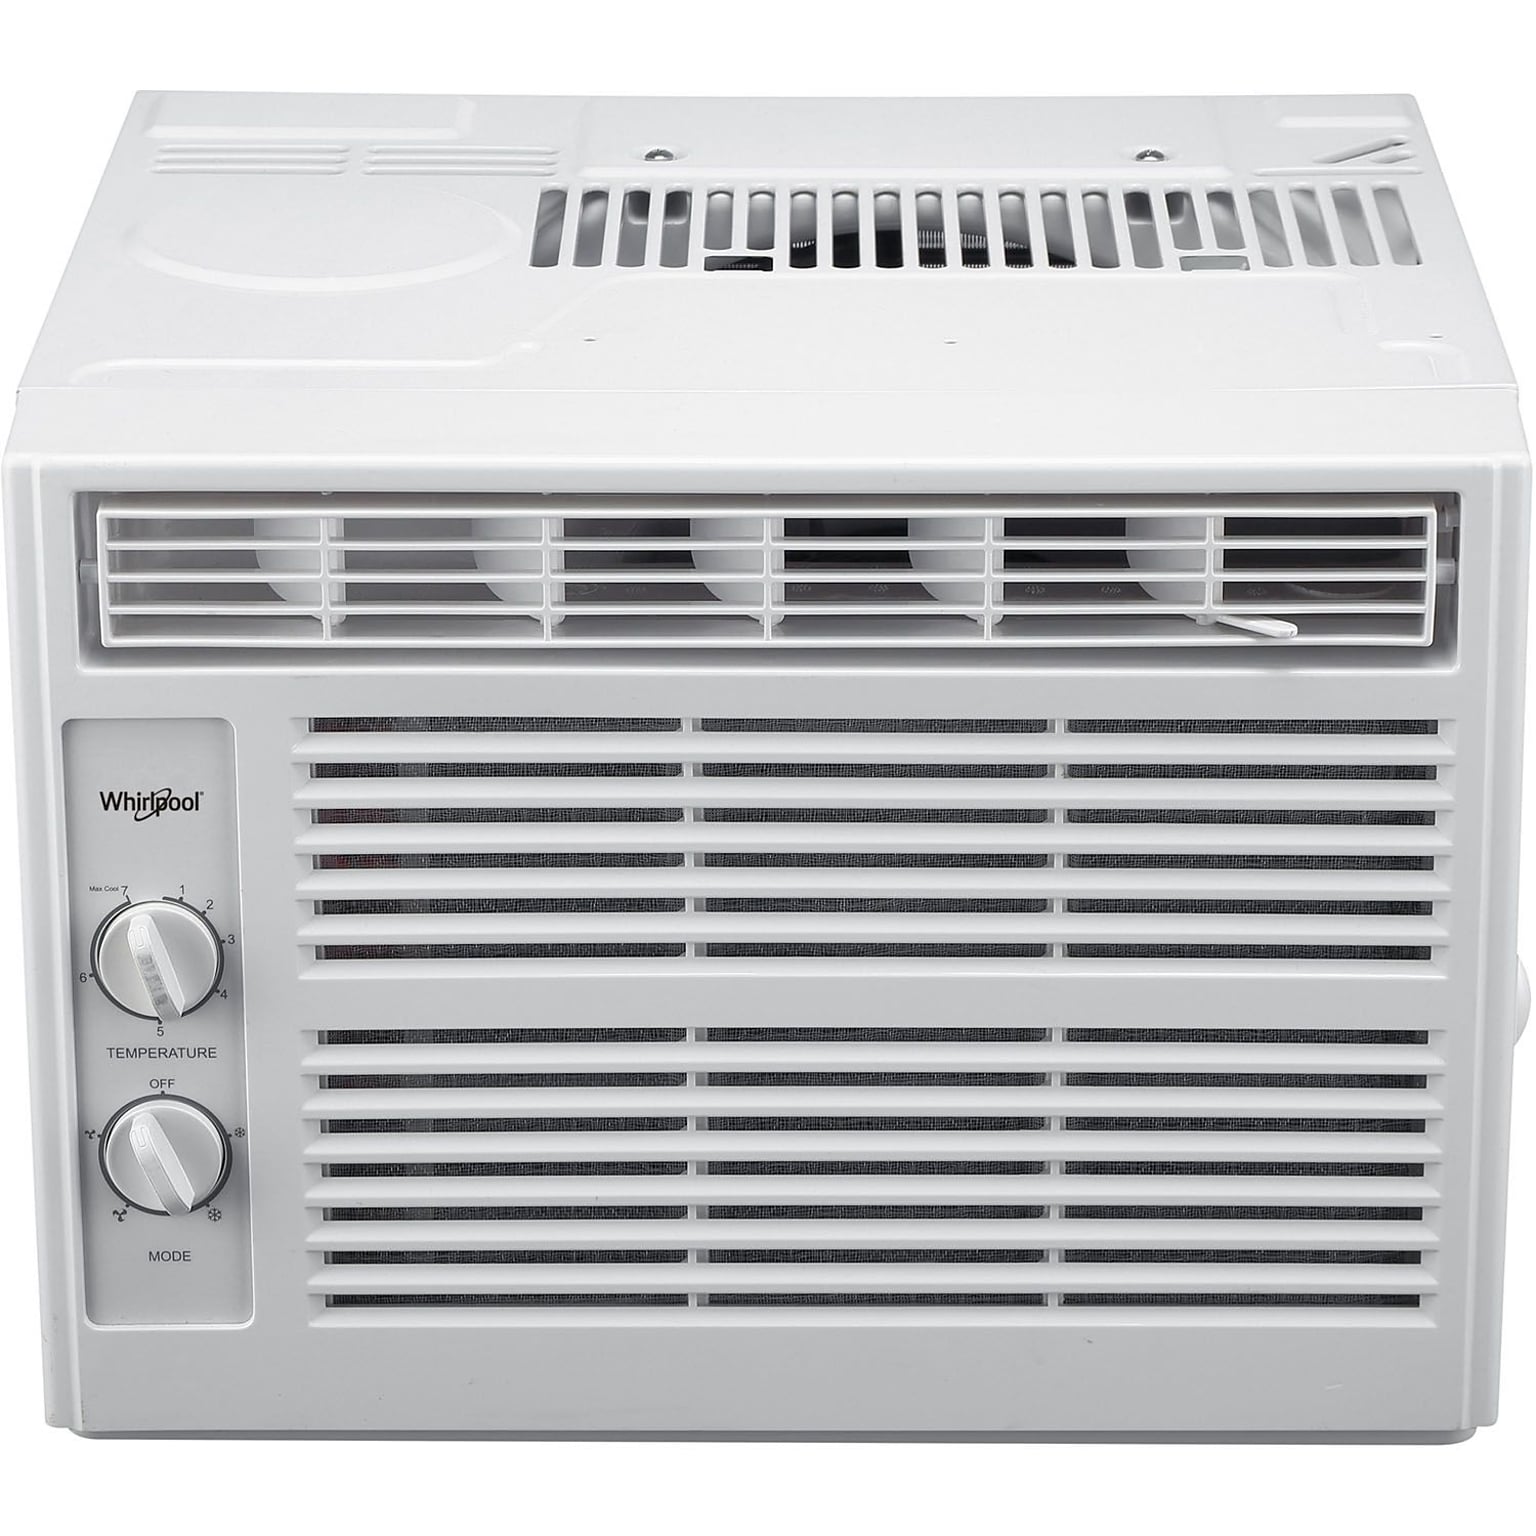 Whirlpool 115-Volt 5000 BTU Window Air Conditioner with Remote, White (WHAW050BW)